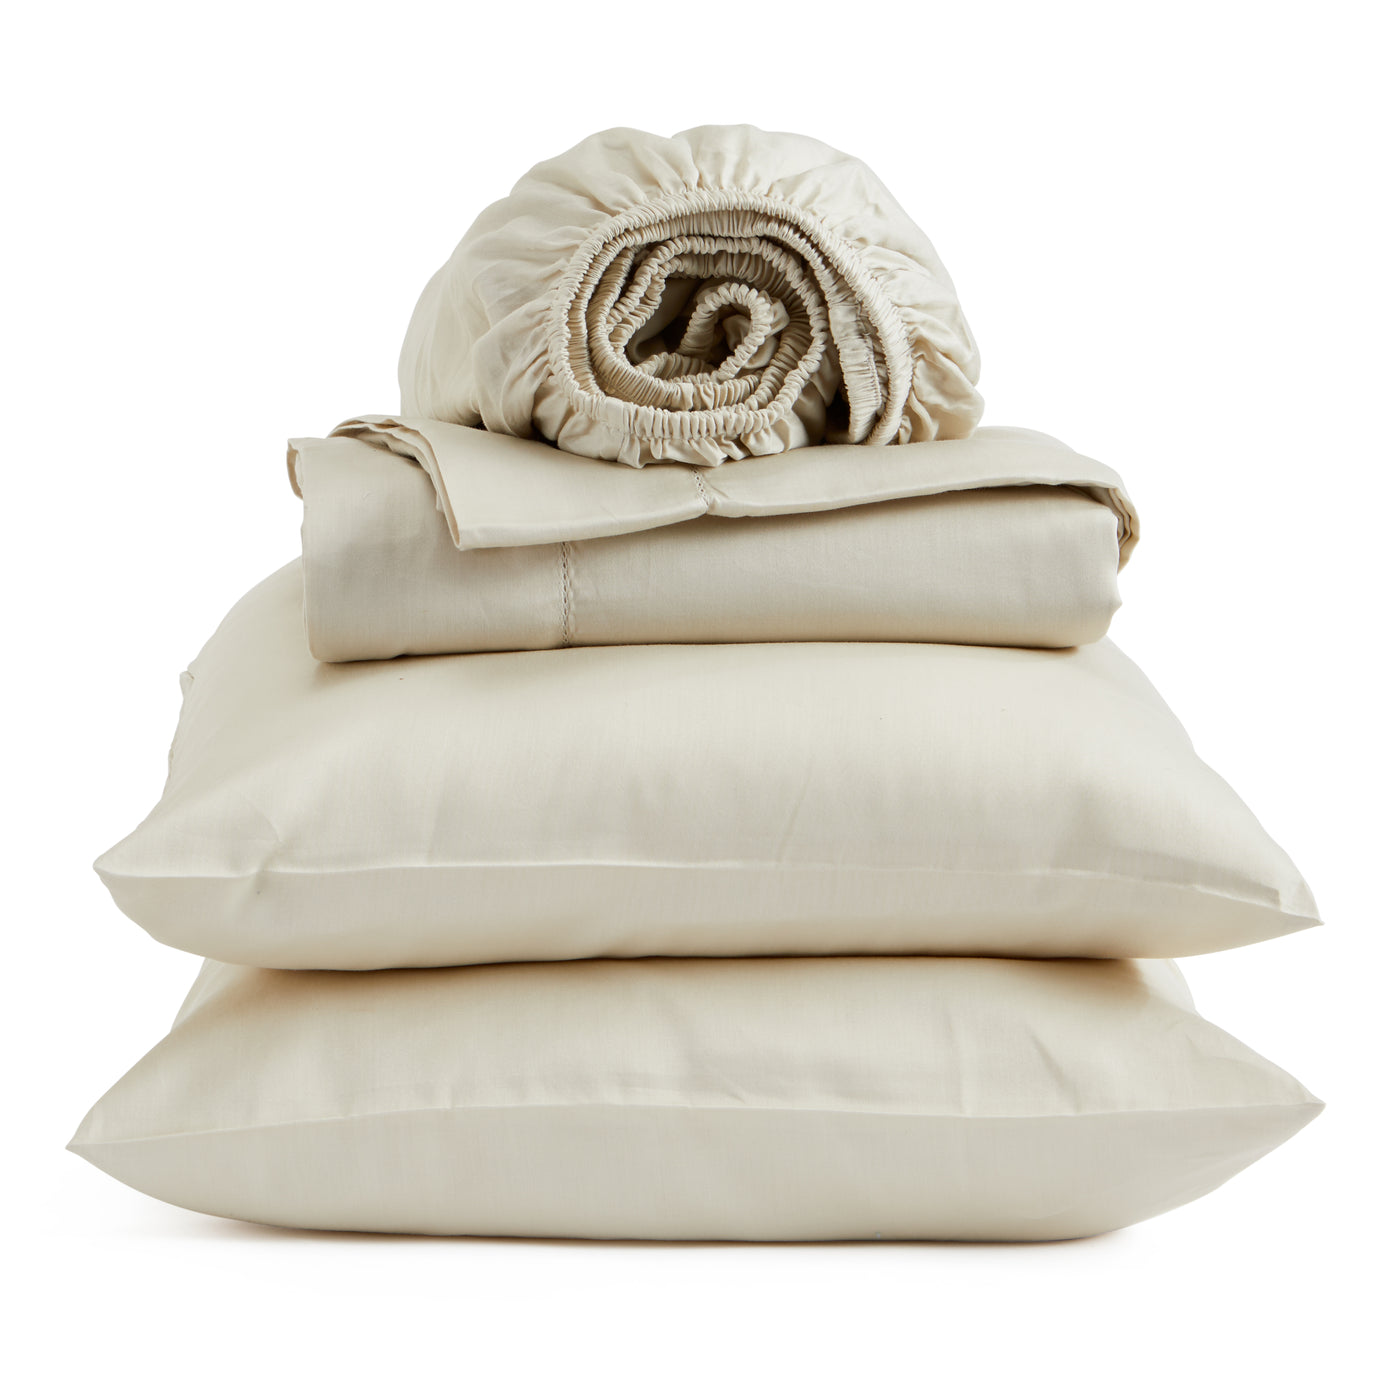 100% Organic Cotton Sheet Set - 300 Thread Count - Bedding Sheets & Pillowcase - Deep Pocket Fits up to a 15-18" Mattress  - Natural - Organic Certified - Comfort & Care Collection